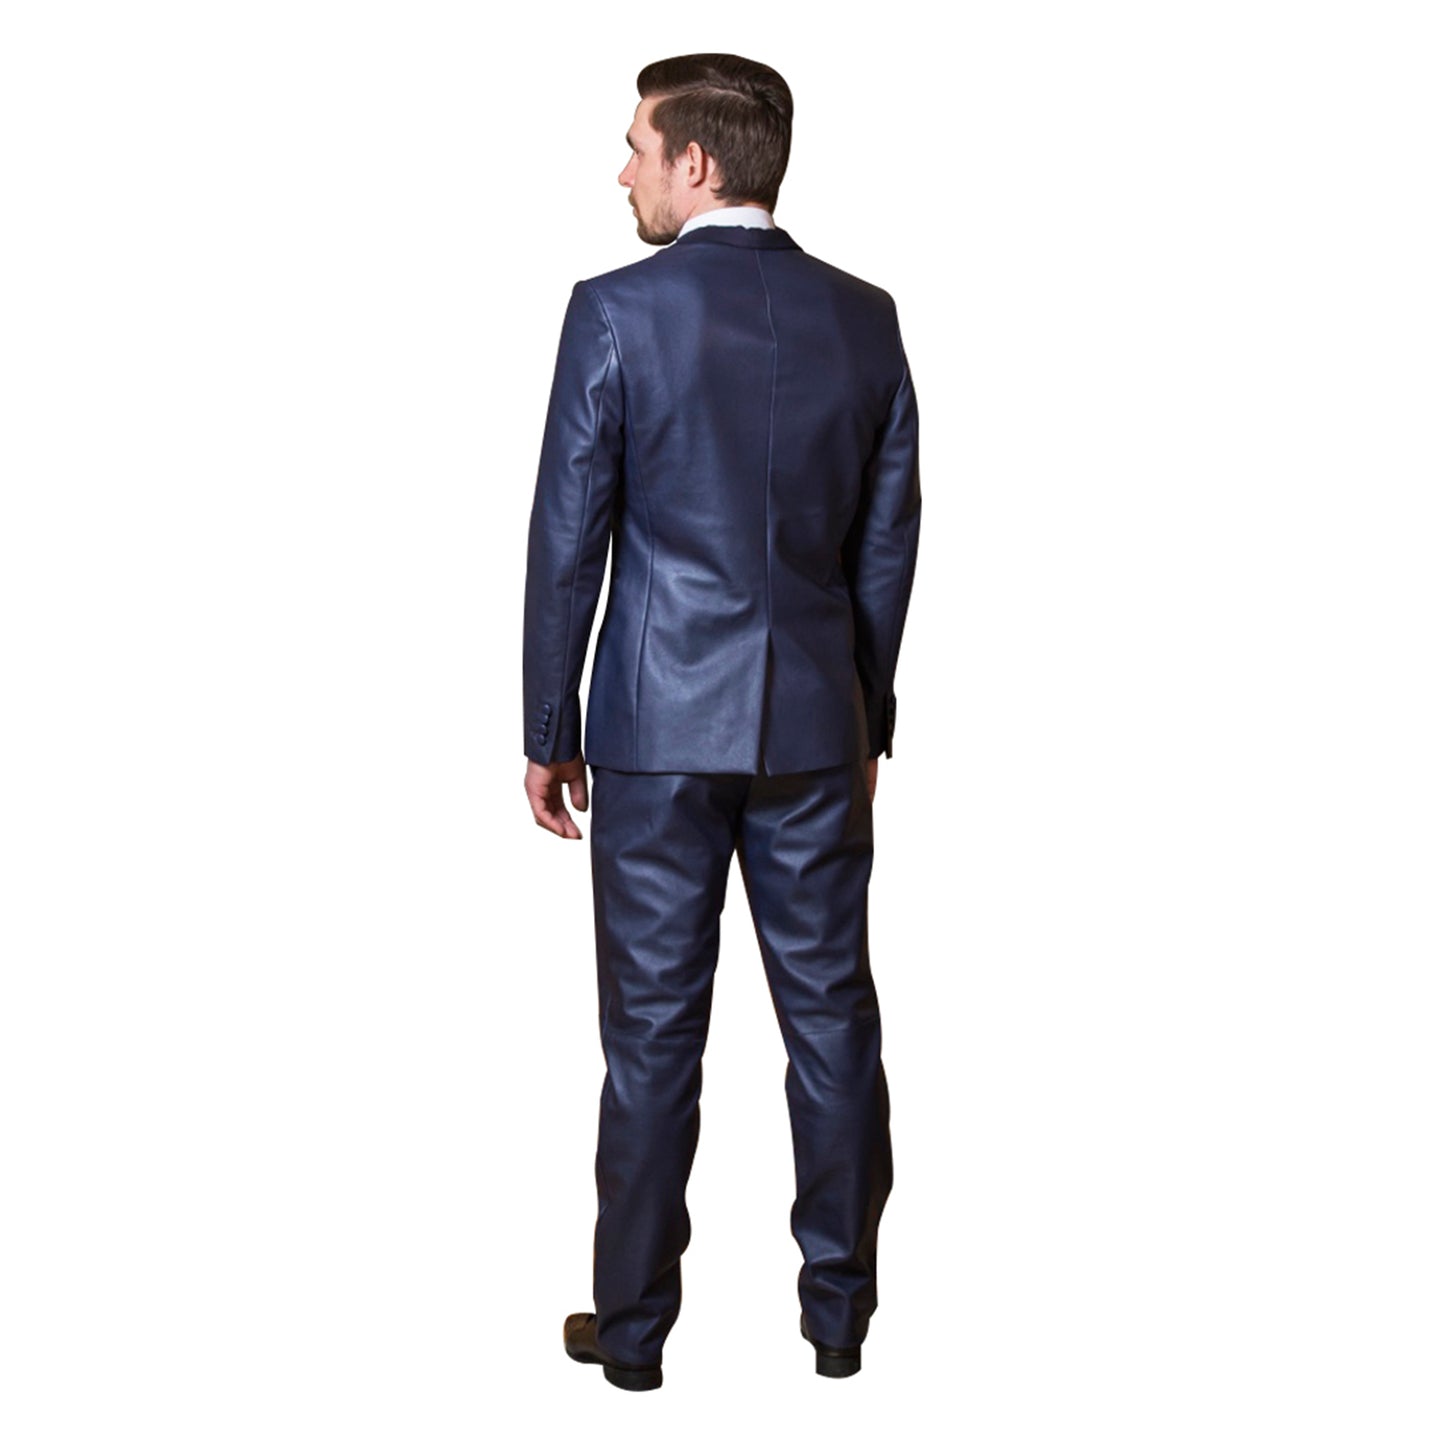 Reindeer Leather Men Suit - Limited Edition